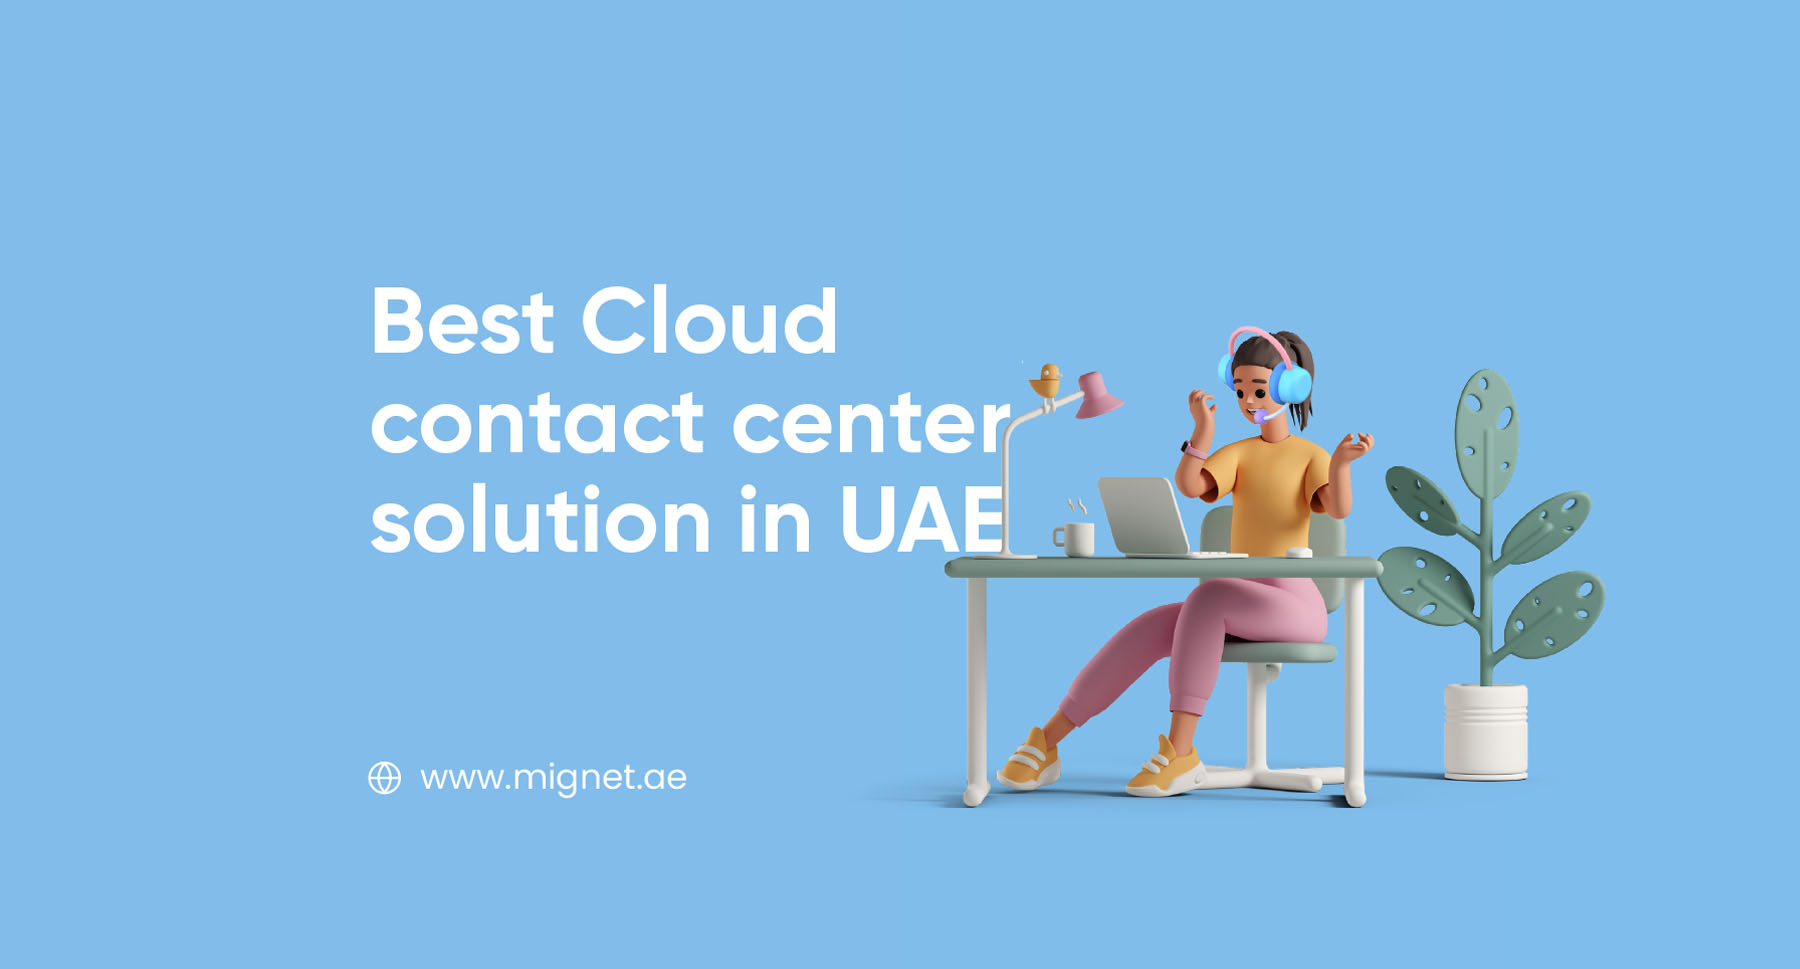 Best Cloud contact center solution in UAE